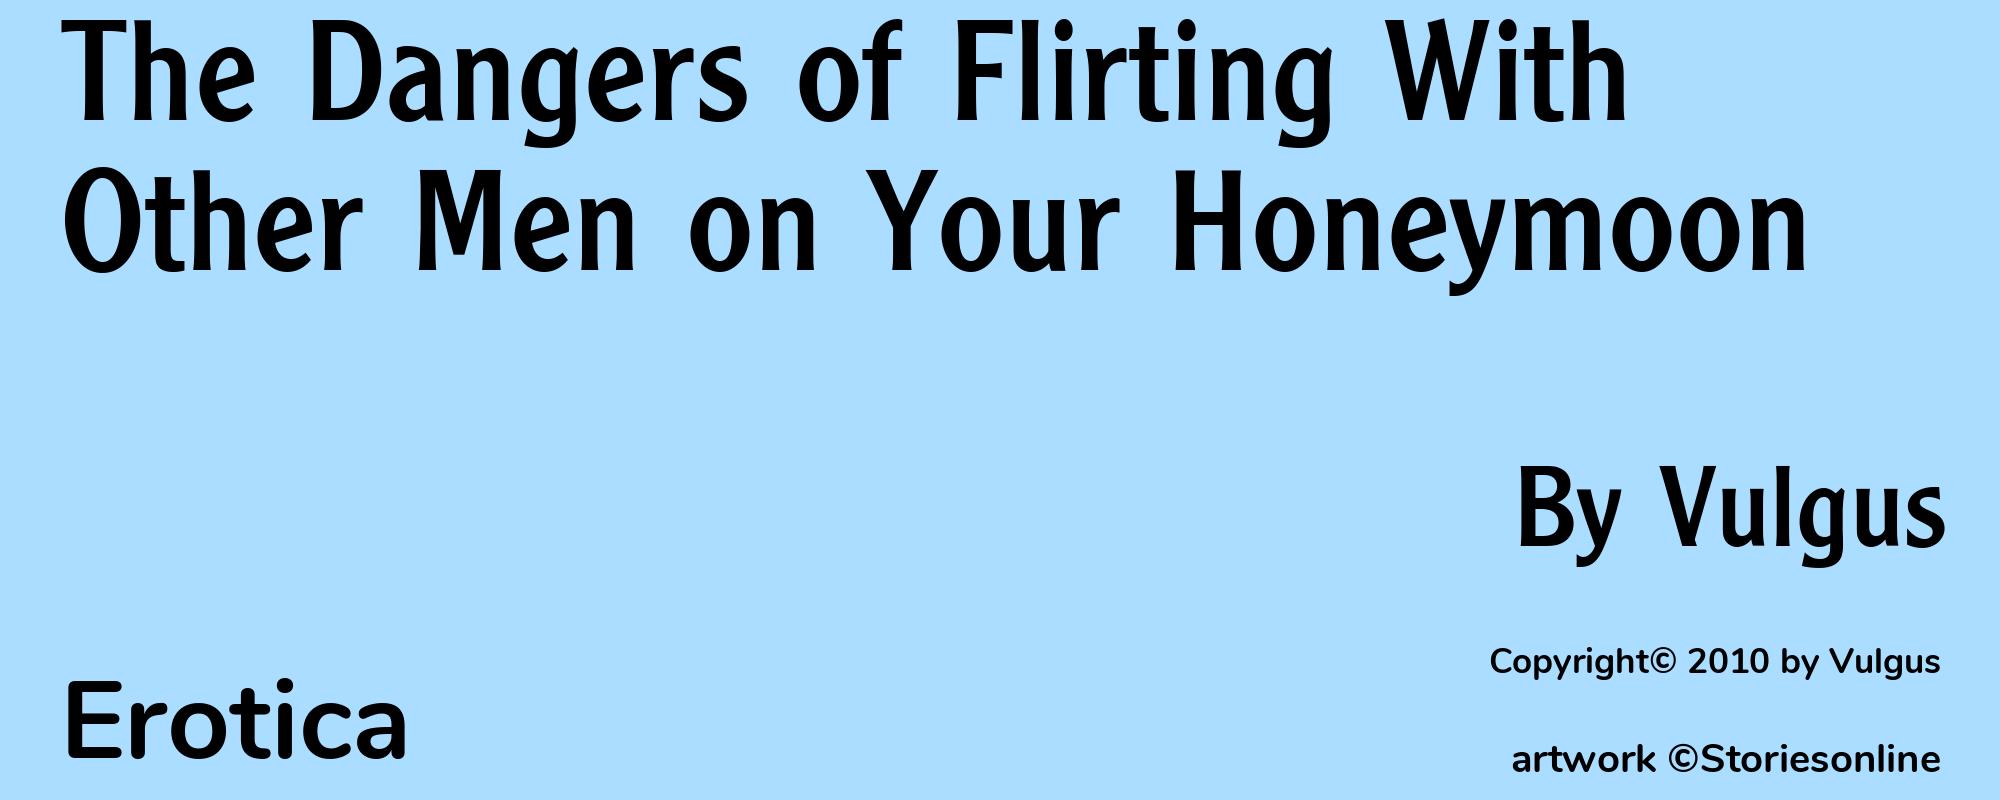 The Dangers of Flirting With Other Men on Your Honeymoon - Cover